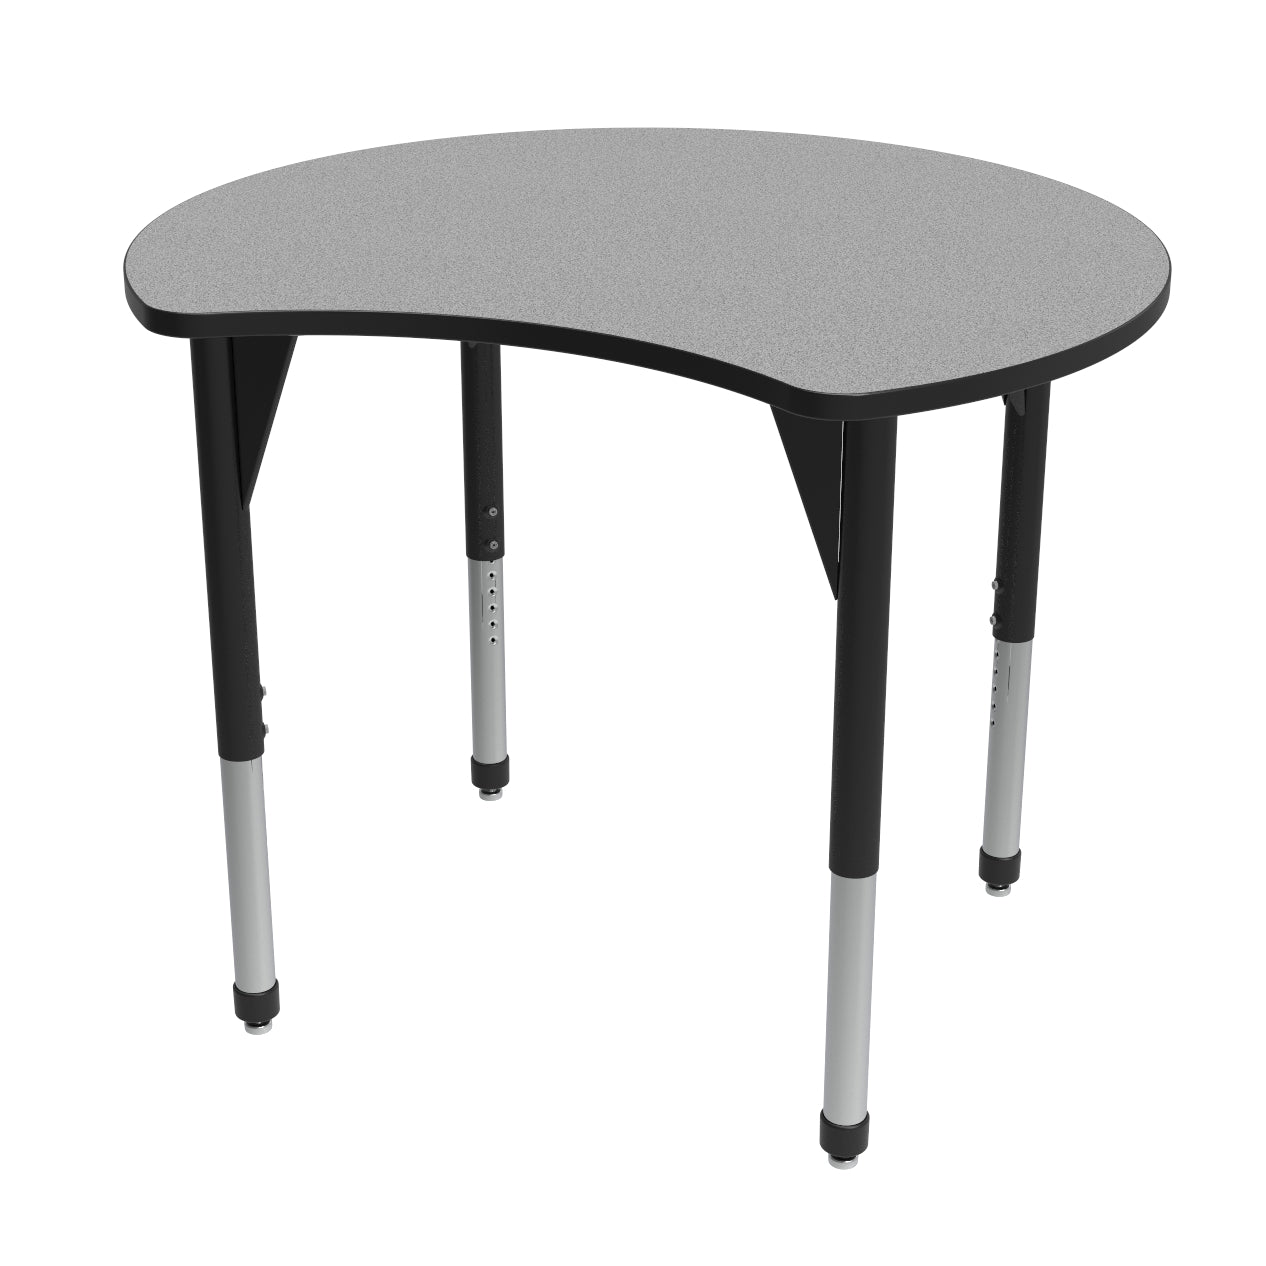 Premier Standing Height Collaborative Classroom Table, 48" Scoop